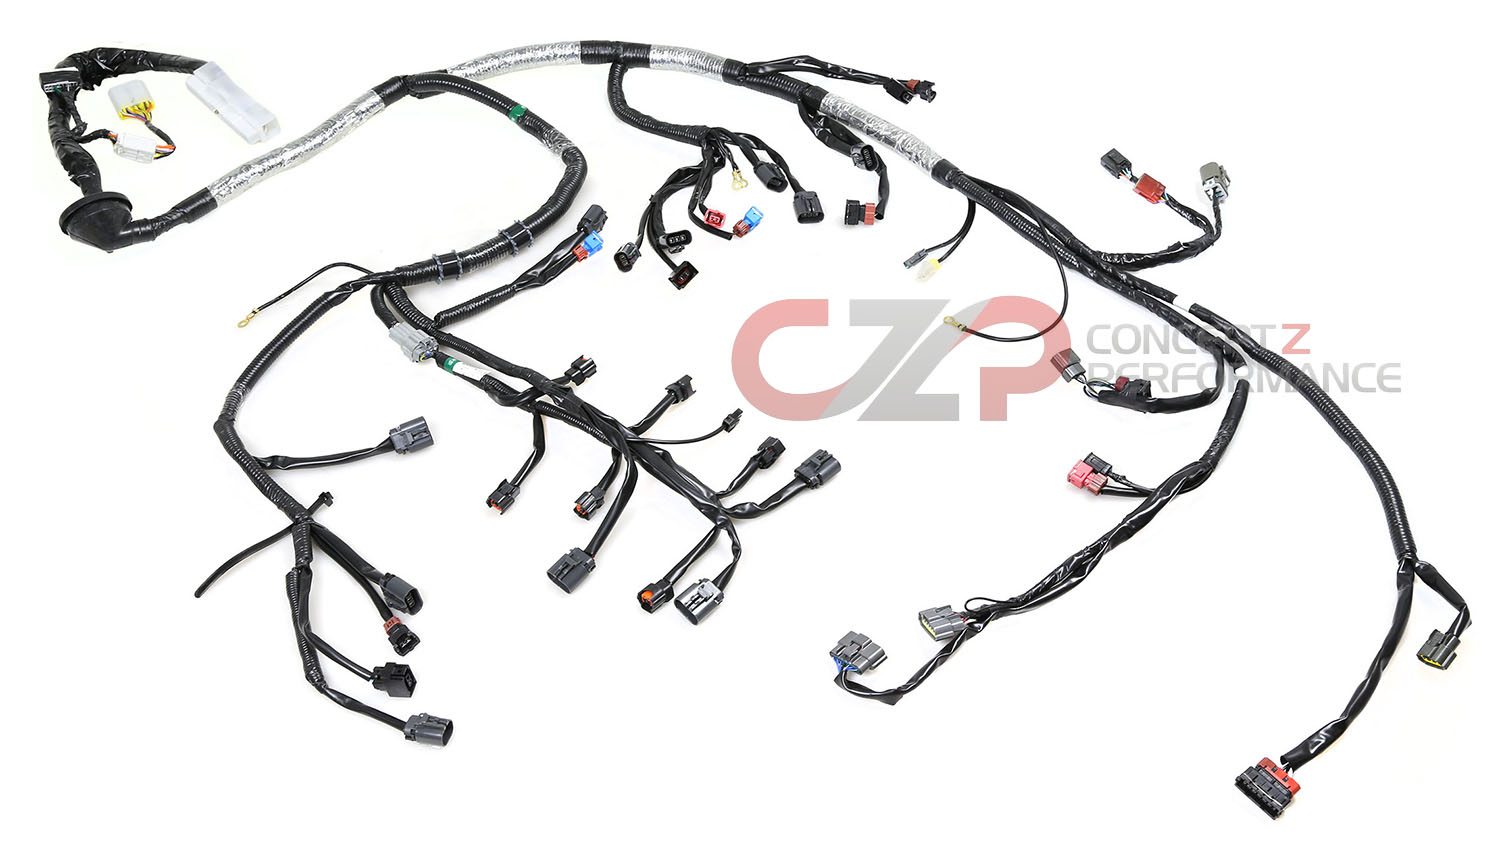 Nissan's wiring harness uses color codes for easy identification.